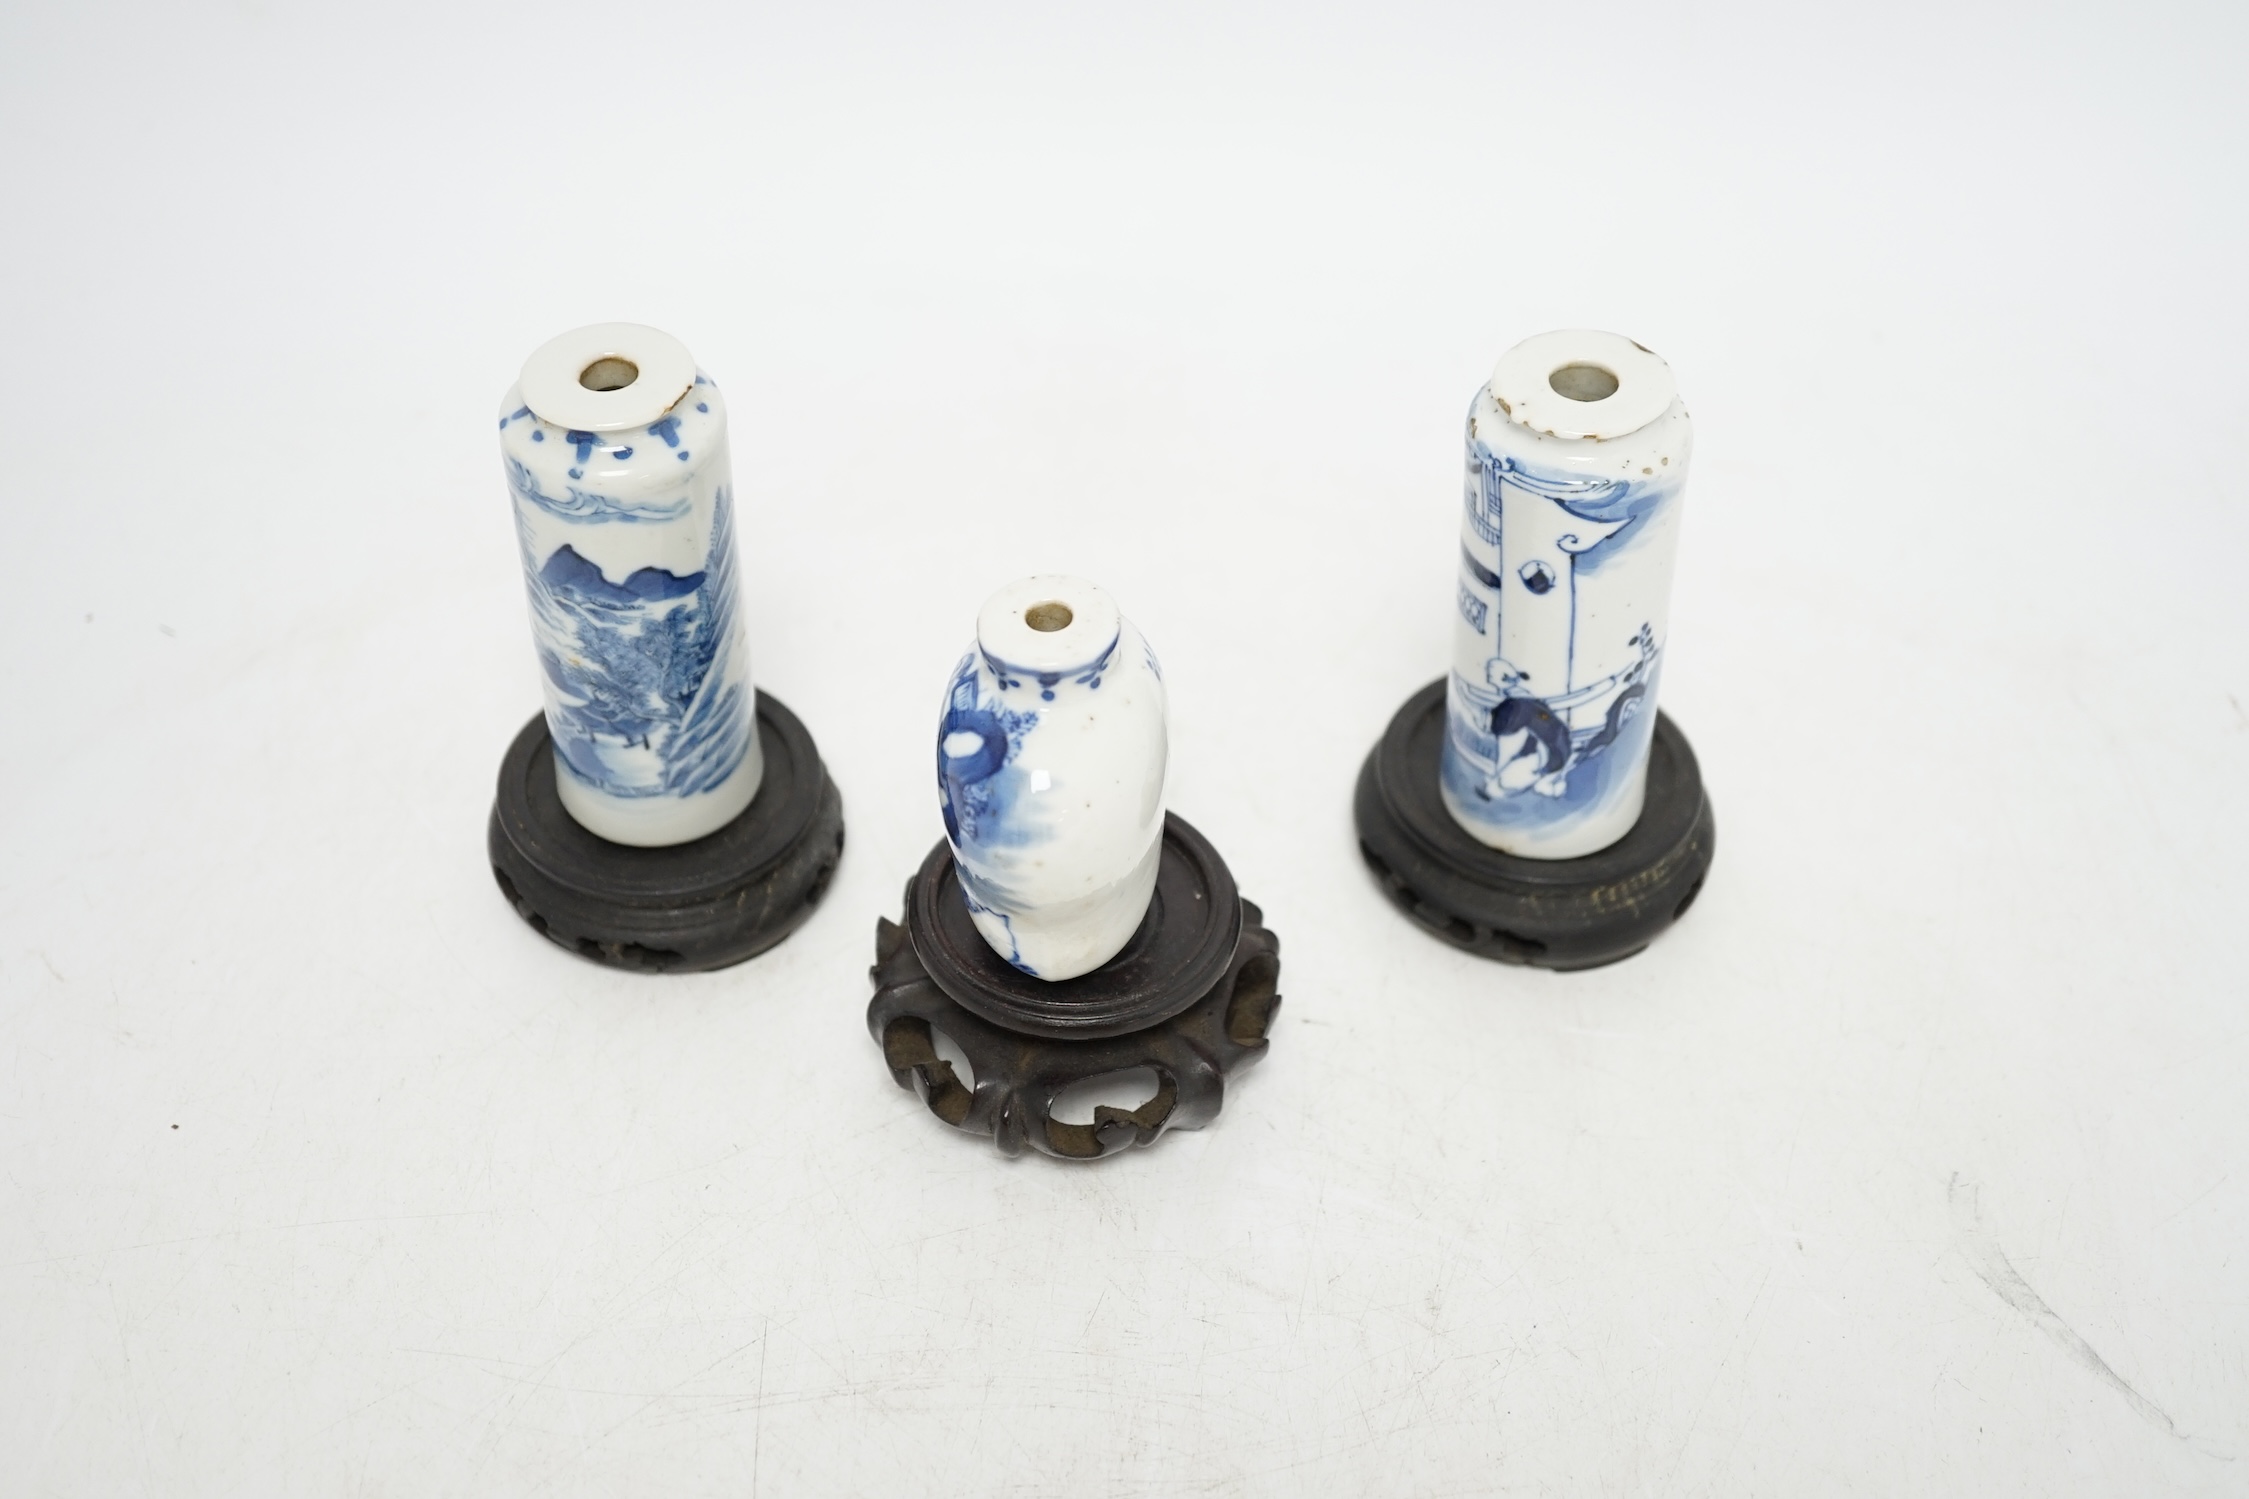 Three Chinese blue and white snuff bottles and three hardwood stands, largest 8cm high. Condition - poor to fair